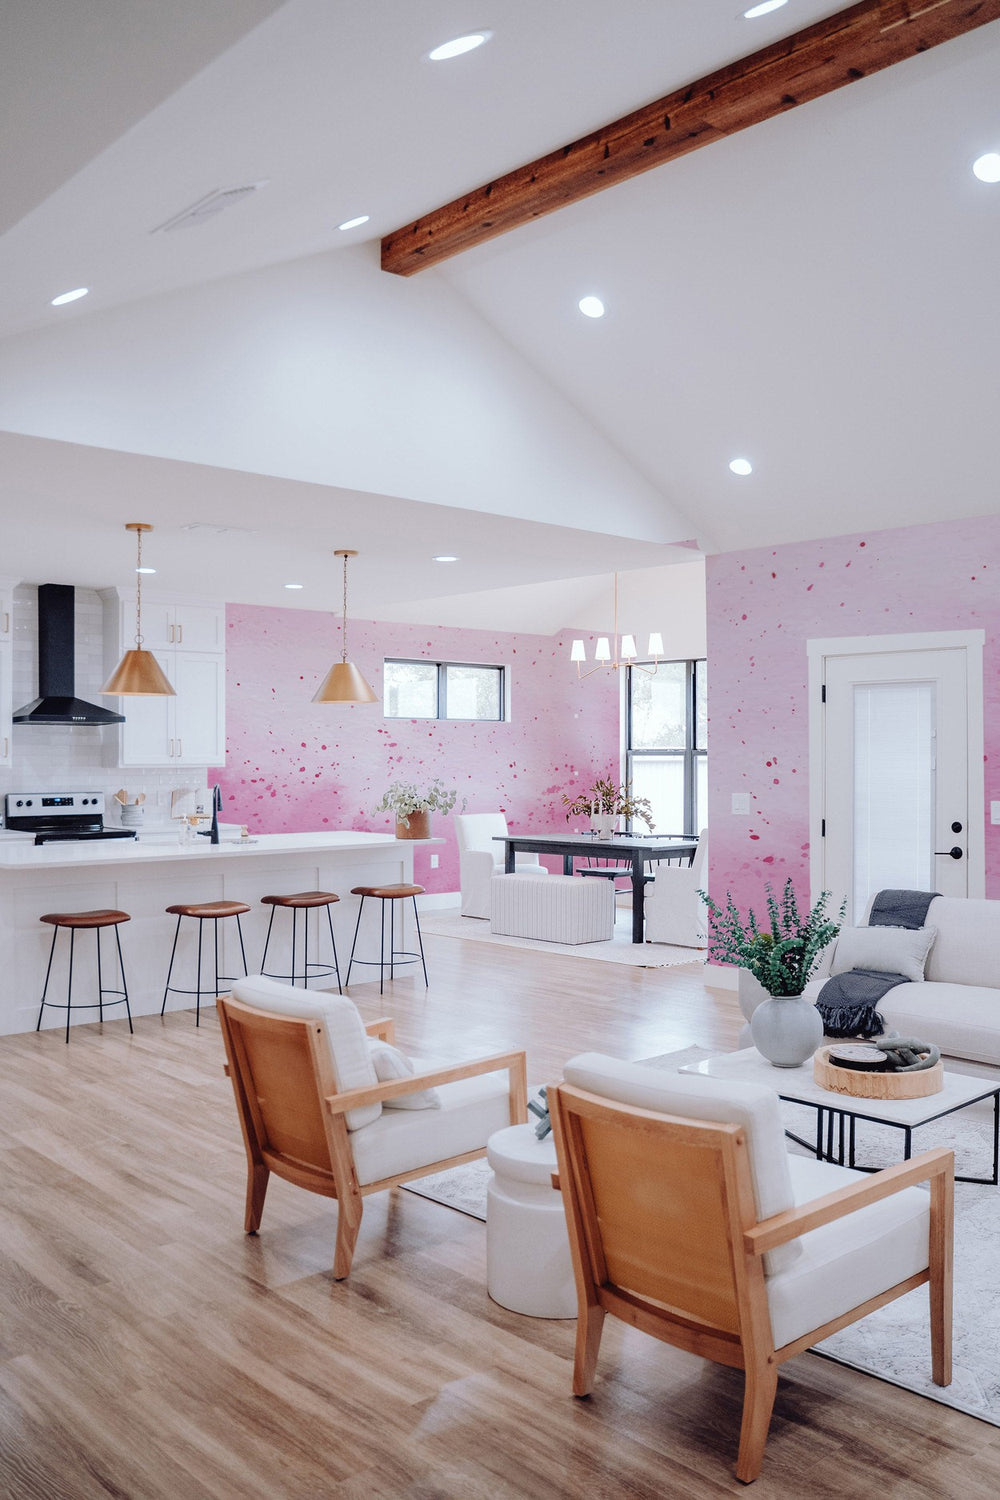 Interior of a modern living room with pink mural accent wall, wooden ceiling beams, and stylish furniture